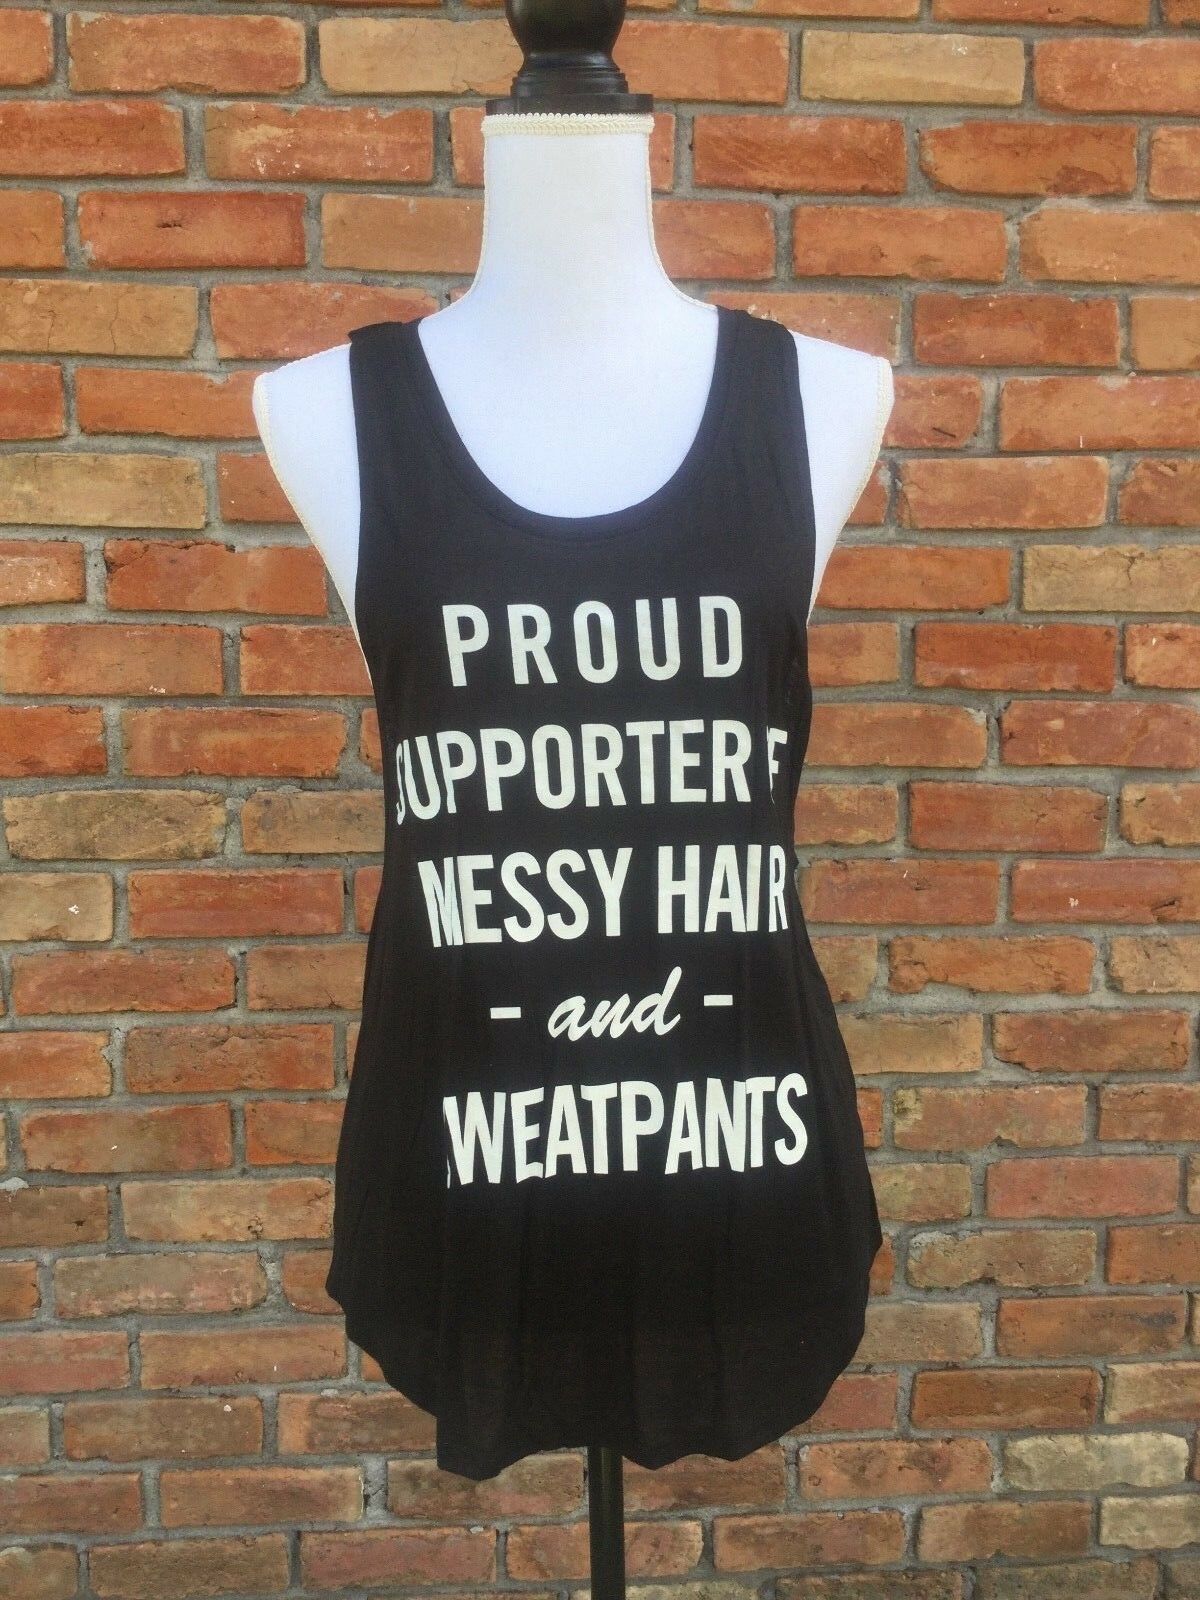 Proud Supporter Of Messy Hair And Sweatpants Boho Armhole Tank Top Black S/M/L